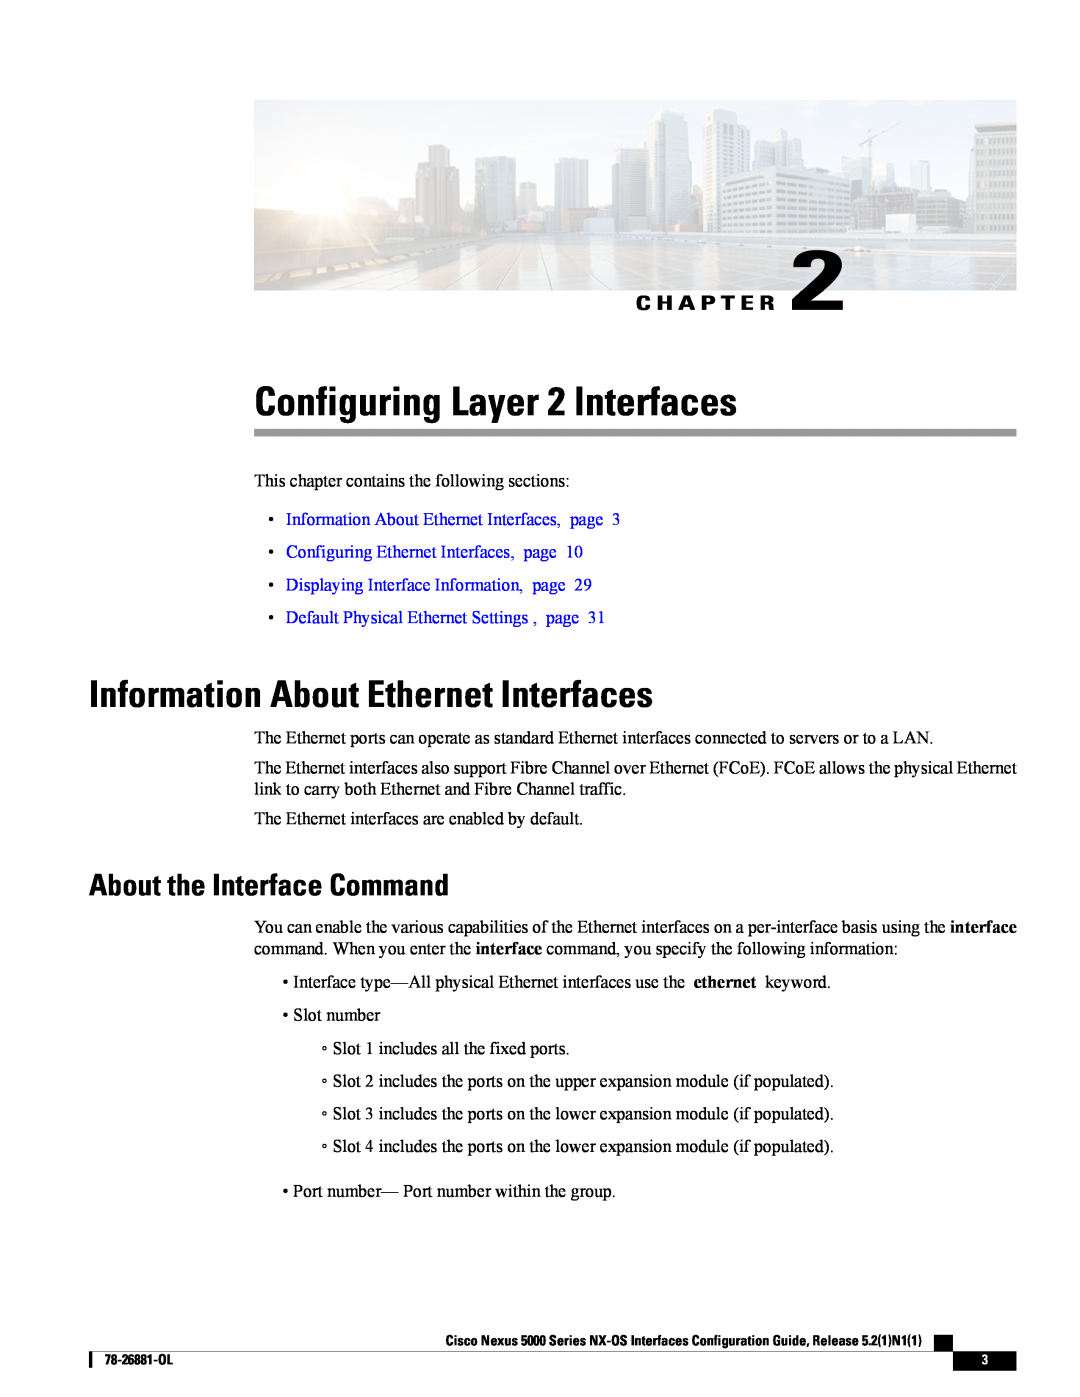 Cisco Systems N5KC5596TFA manual Configuring Layer 2 Interfaces, Information About Ethernet Interfaces, C H A P T E R 